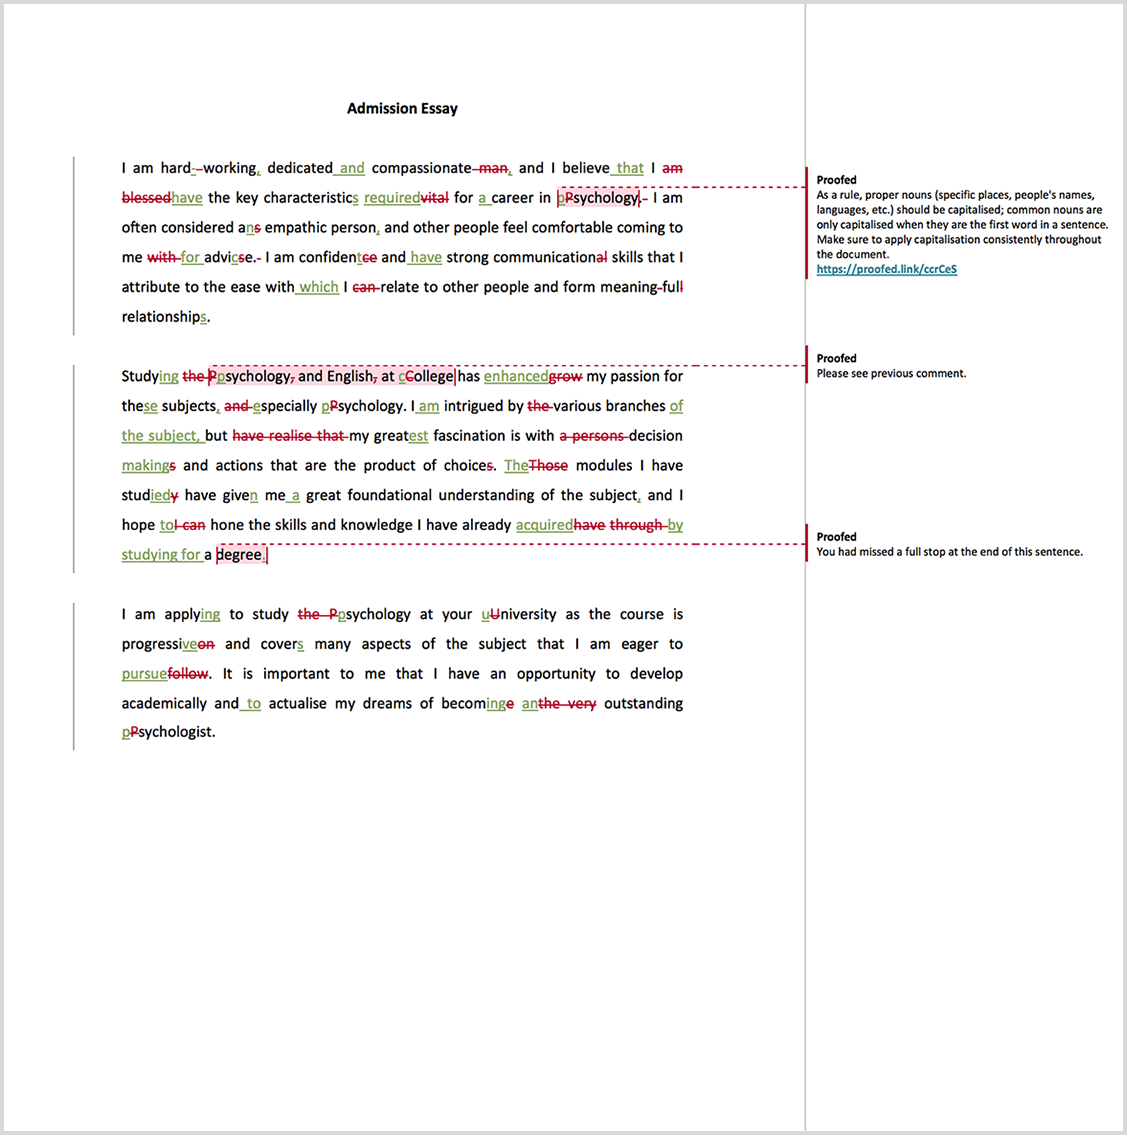 Admissions Essay Proofreading Example (After Editing)